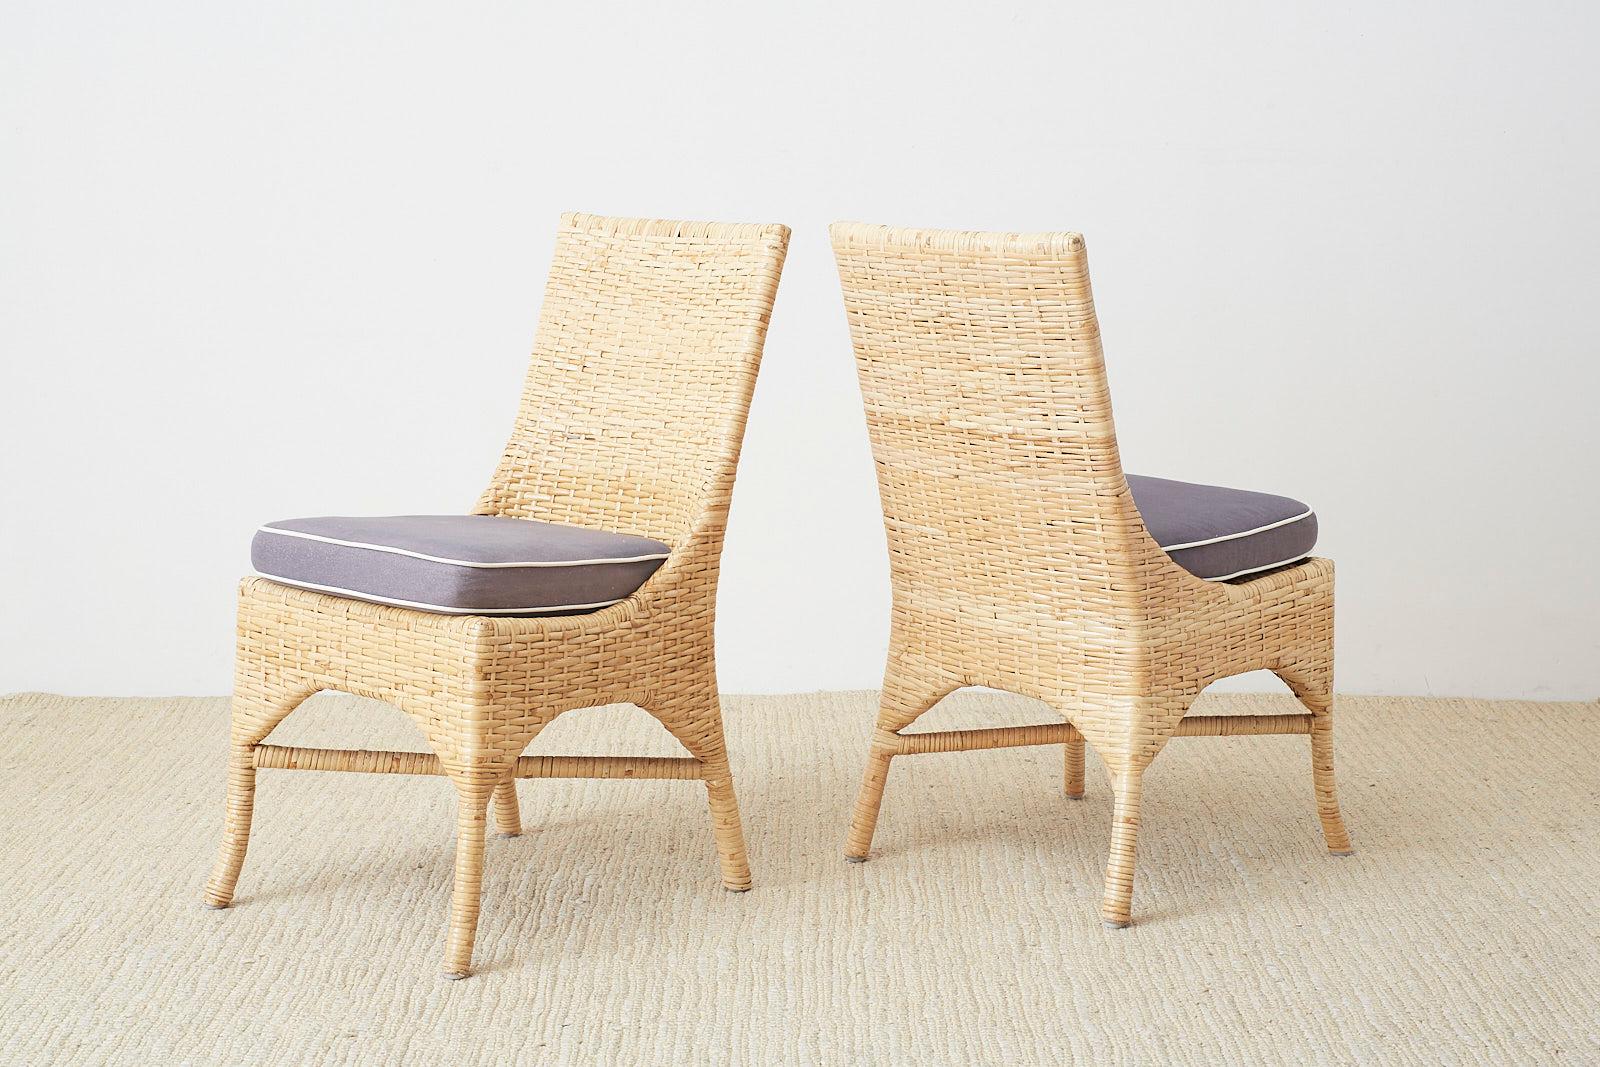 Organic Modern Set of Four McGuire Woven Rattan Wicker Dining Chairs